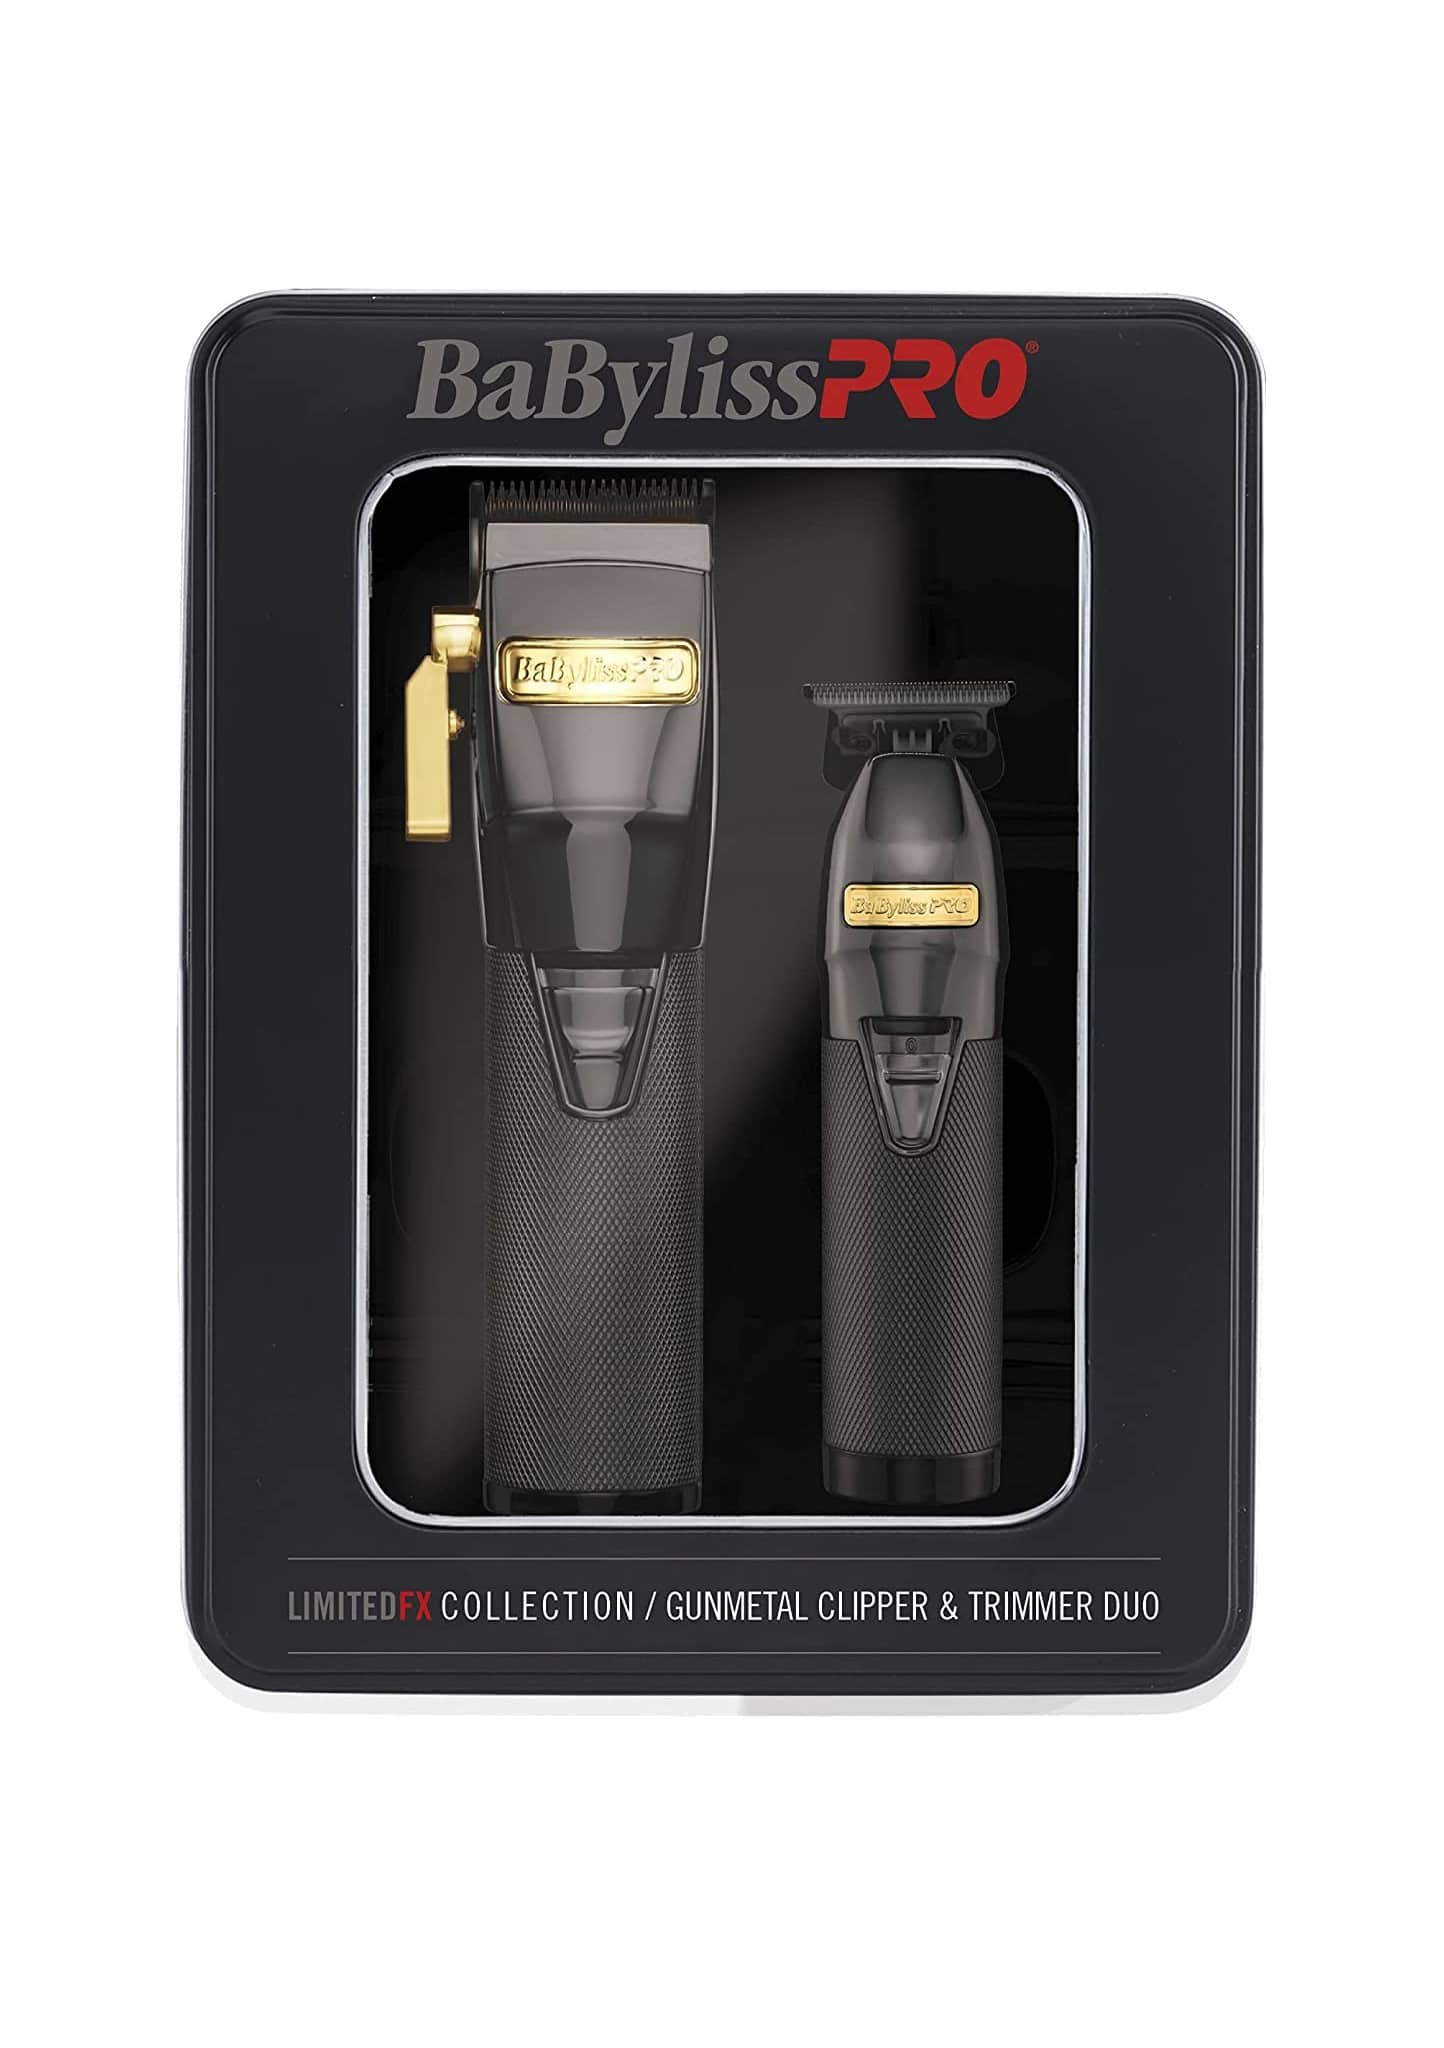 BaByliss PRO LimitedFX Gold バリカン 希少 レア-